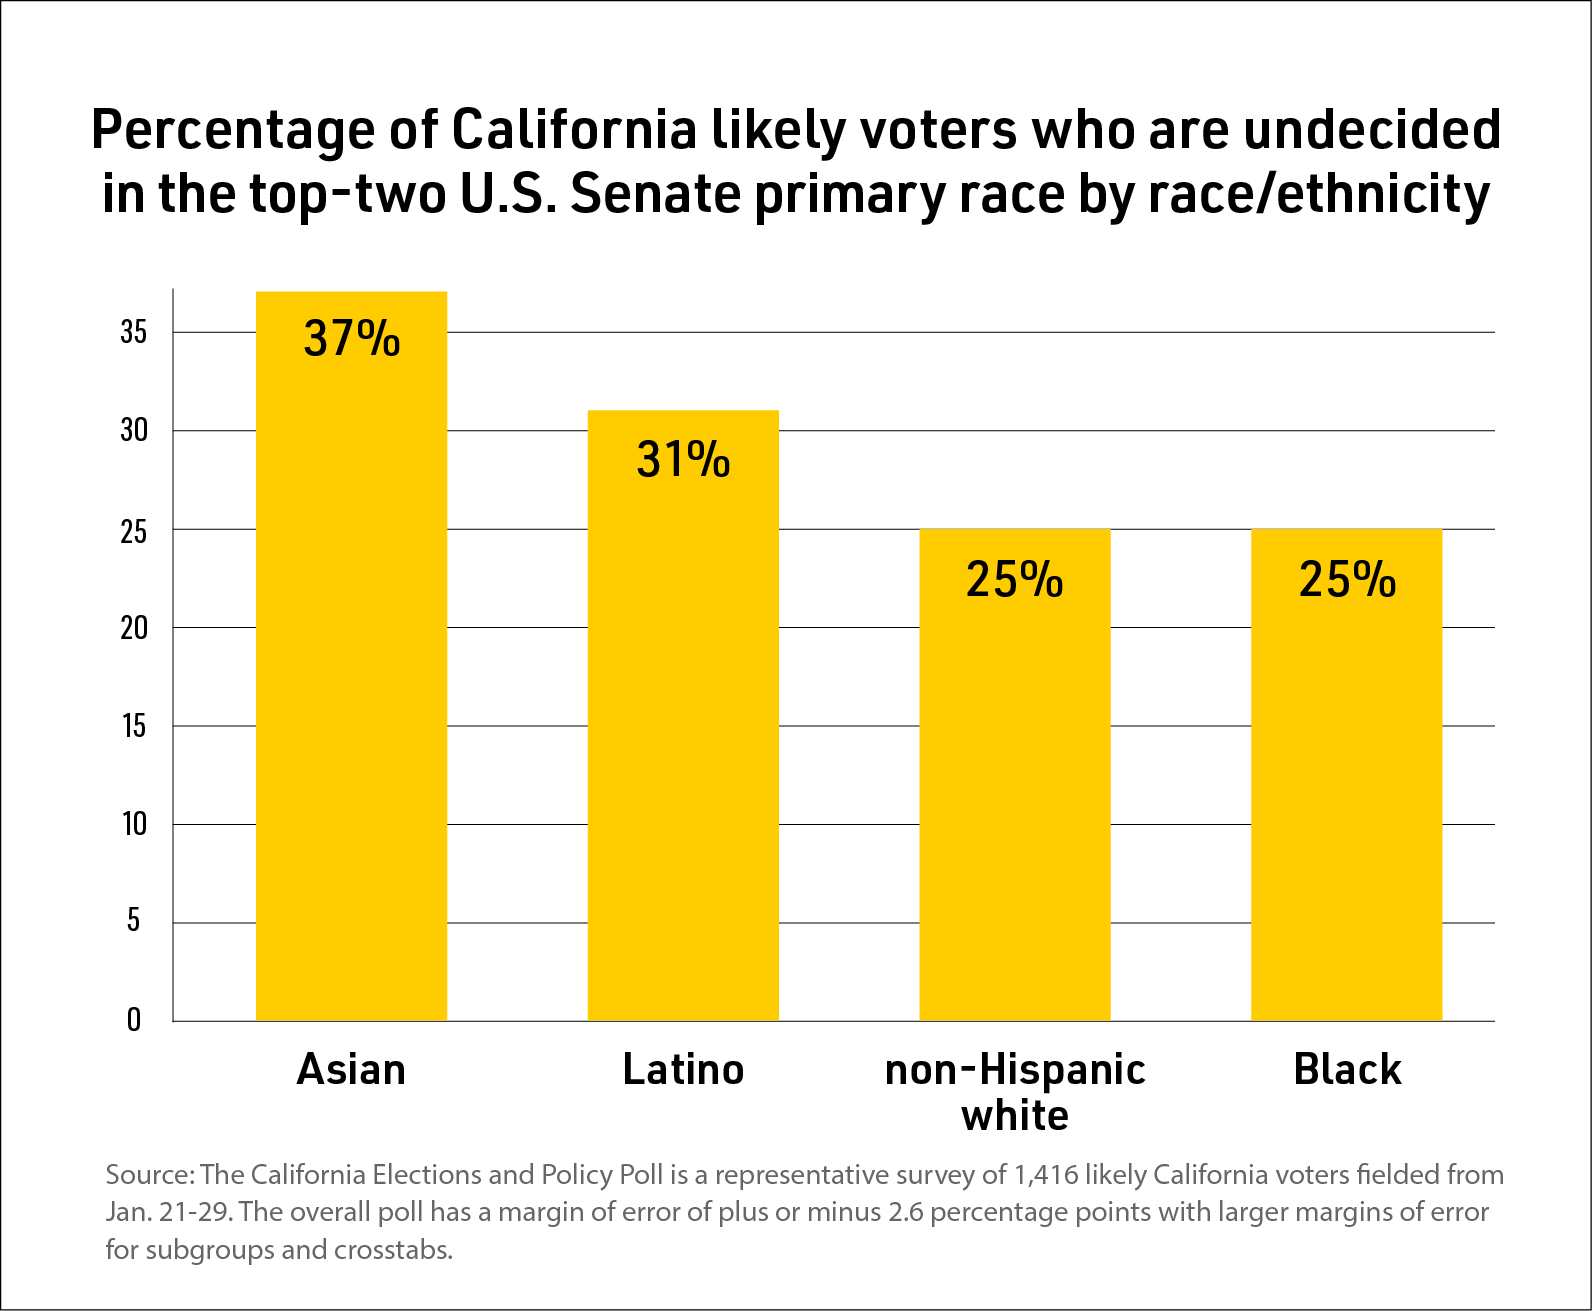 Graphic: Percentage of California likely voters who are undecided in the top-two U.S. senate primary race by race/ethnicity